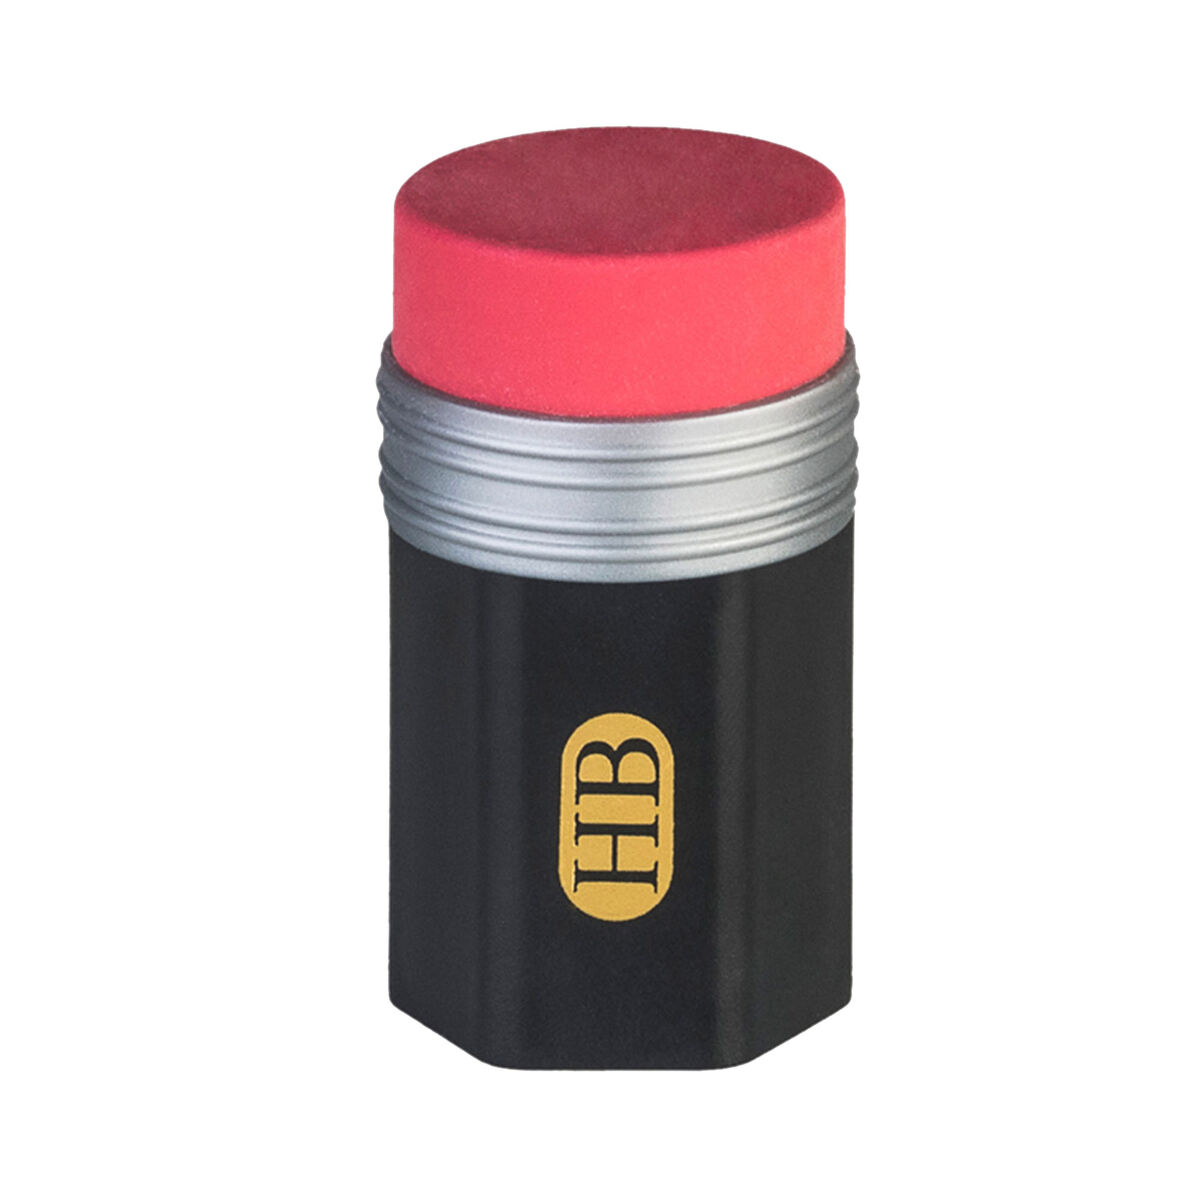 Two-In-One Rubber With Sharpener, , zoo